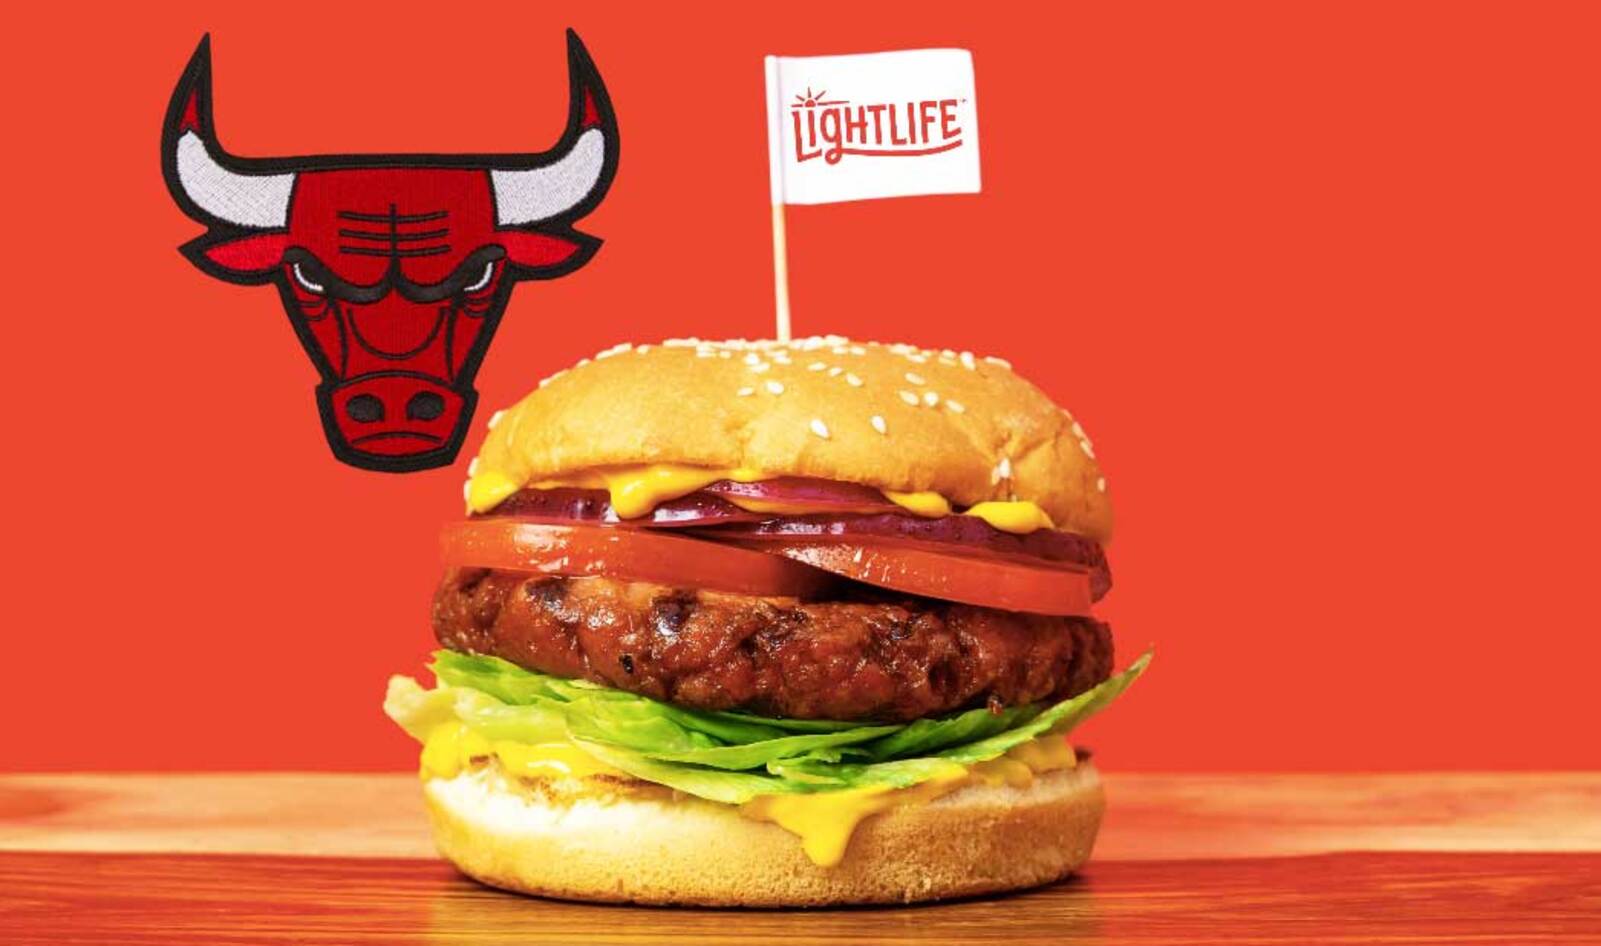 Meatless Burgers and Hot Dogs Now Served at Chicago Bulls Games